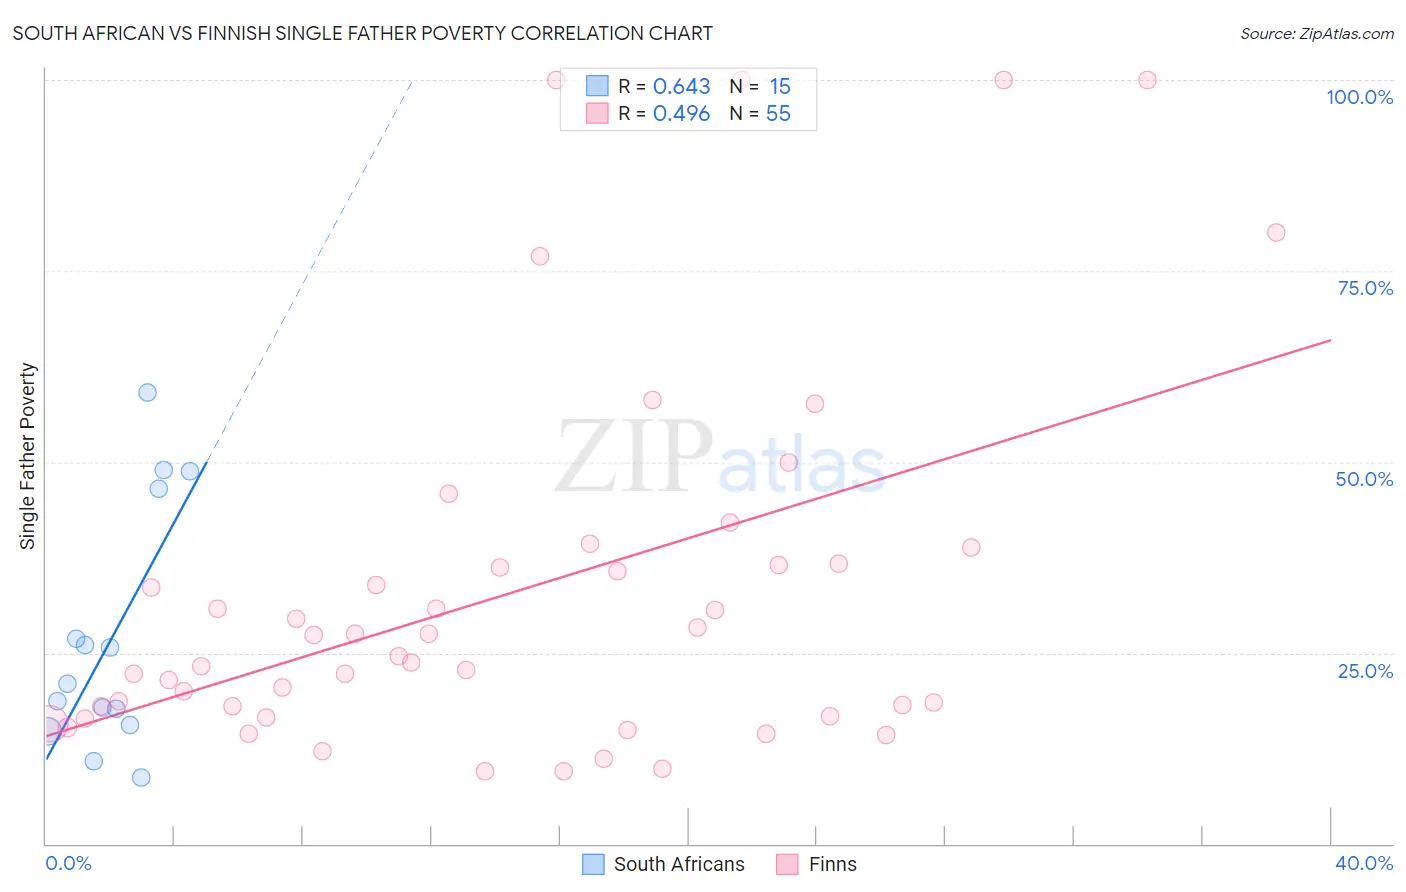 South African vs Finnish Single Father Poverty